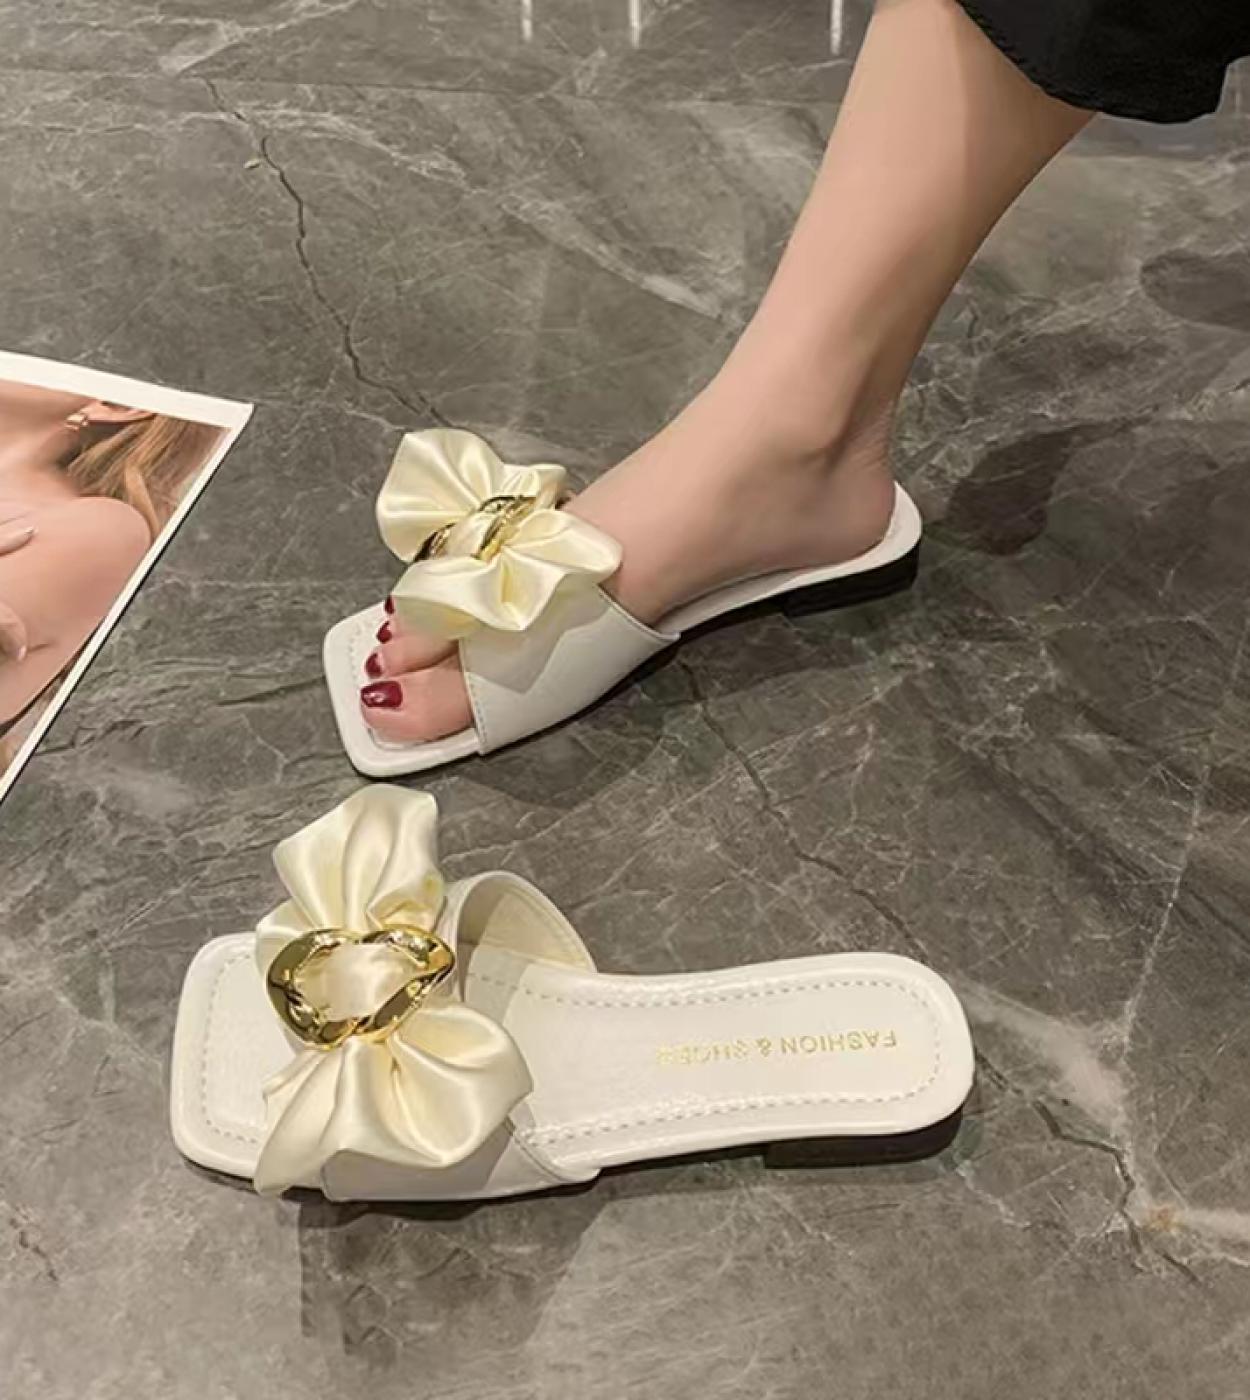 Women Sandals 2022 Summer Shoes For Women Slippers Casual Bow Shoes Women Fashion Mullers Rome Flat Flip Flops Slides No